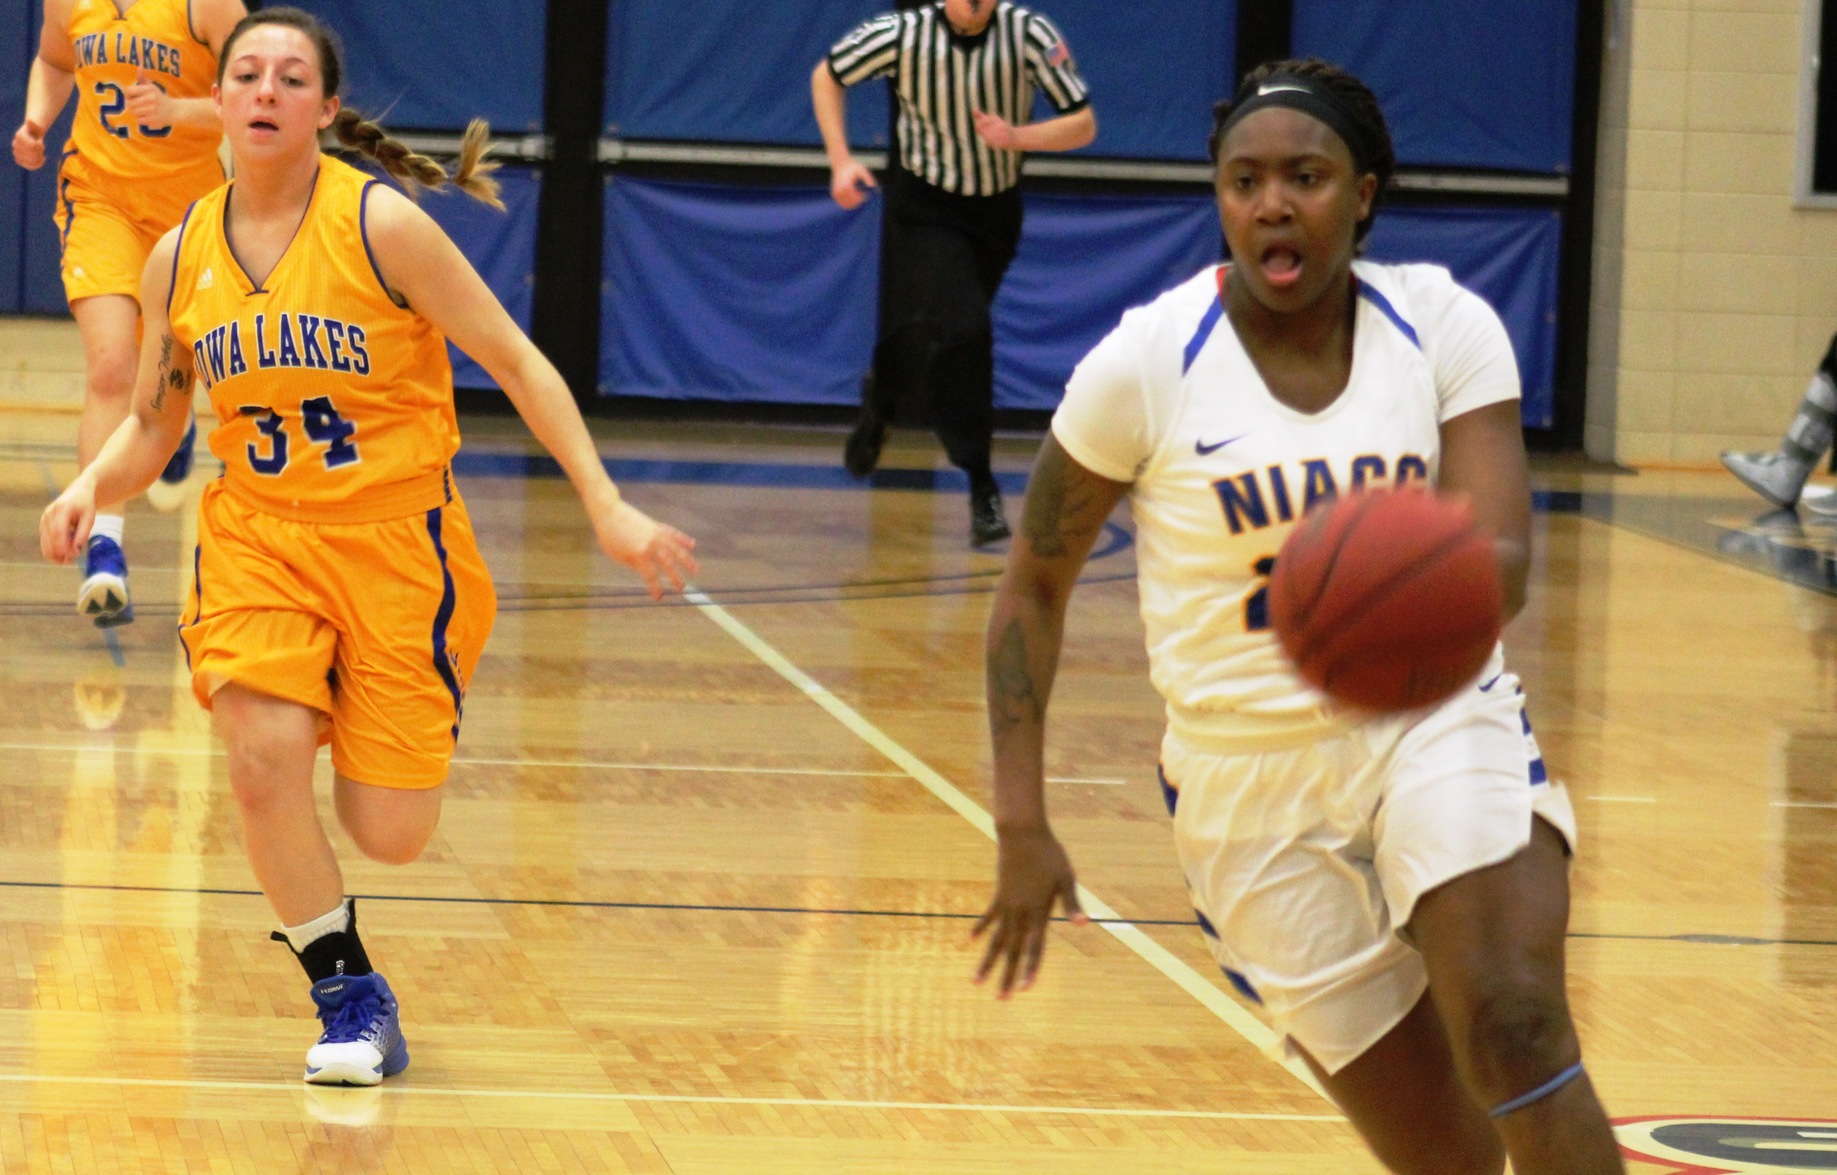 NIACC's Cierra Stanciel drives to the basket in Wednesday's game against Iowa Lakes.